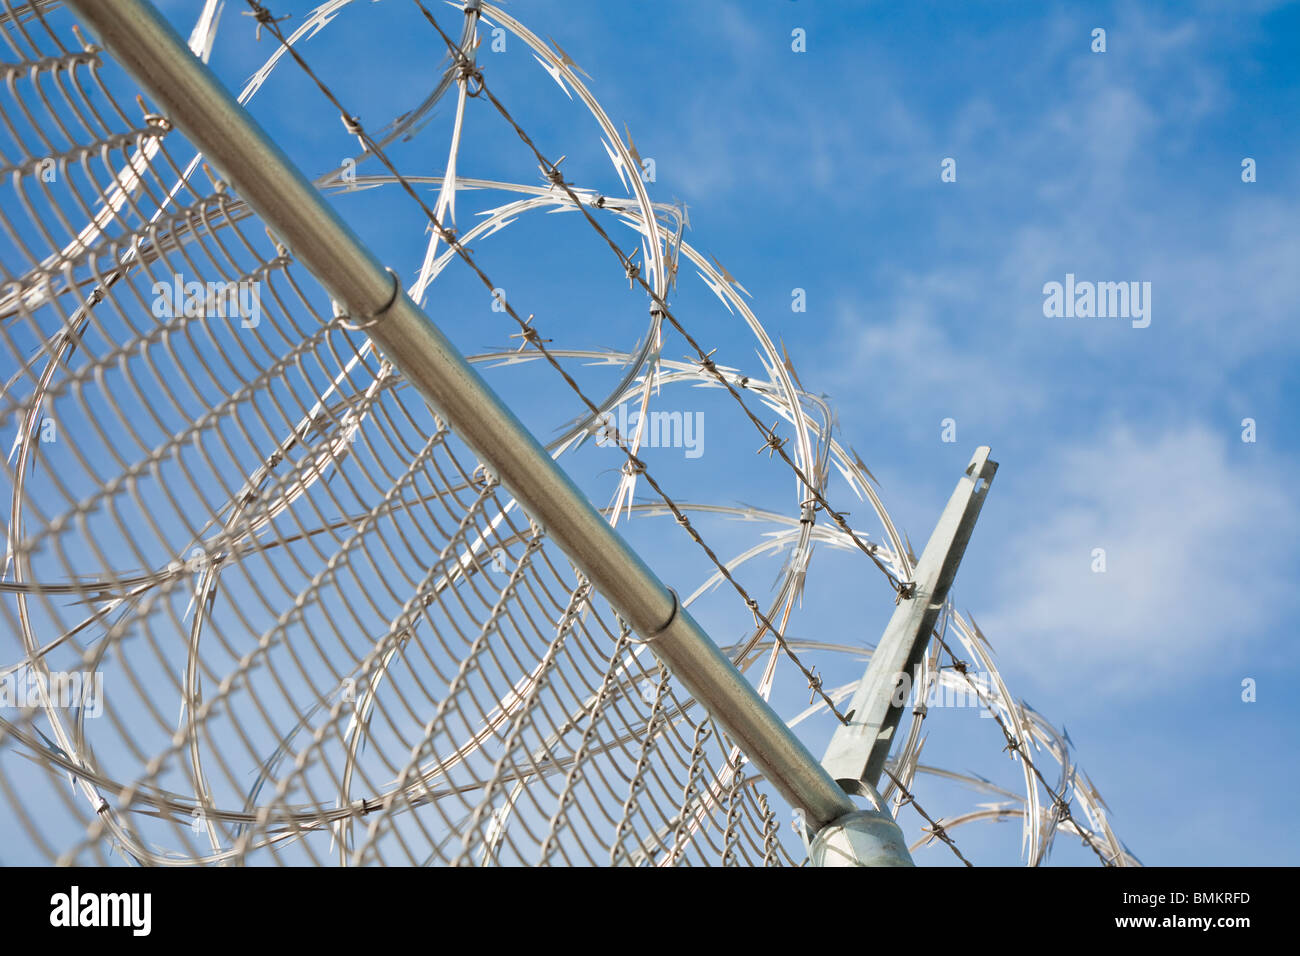 Florida - Feb 2009 - Stainless steel razor wire spirals over chain link fence at correctional facility in central Florida Stock Photo